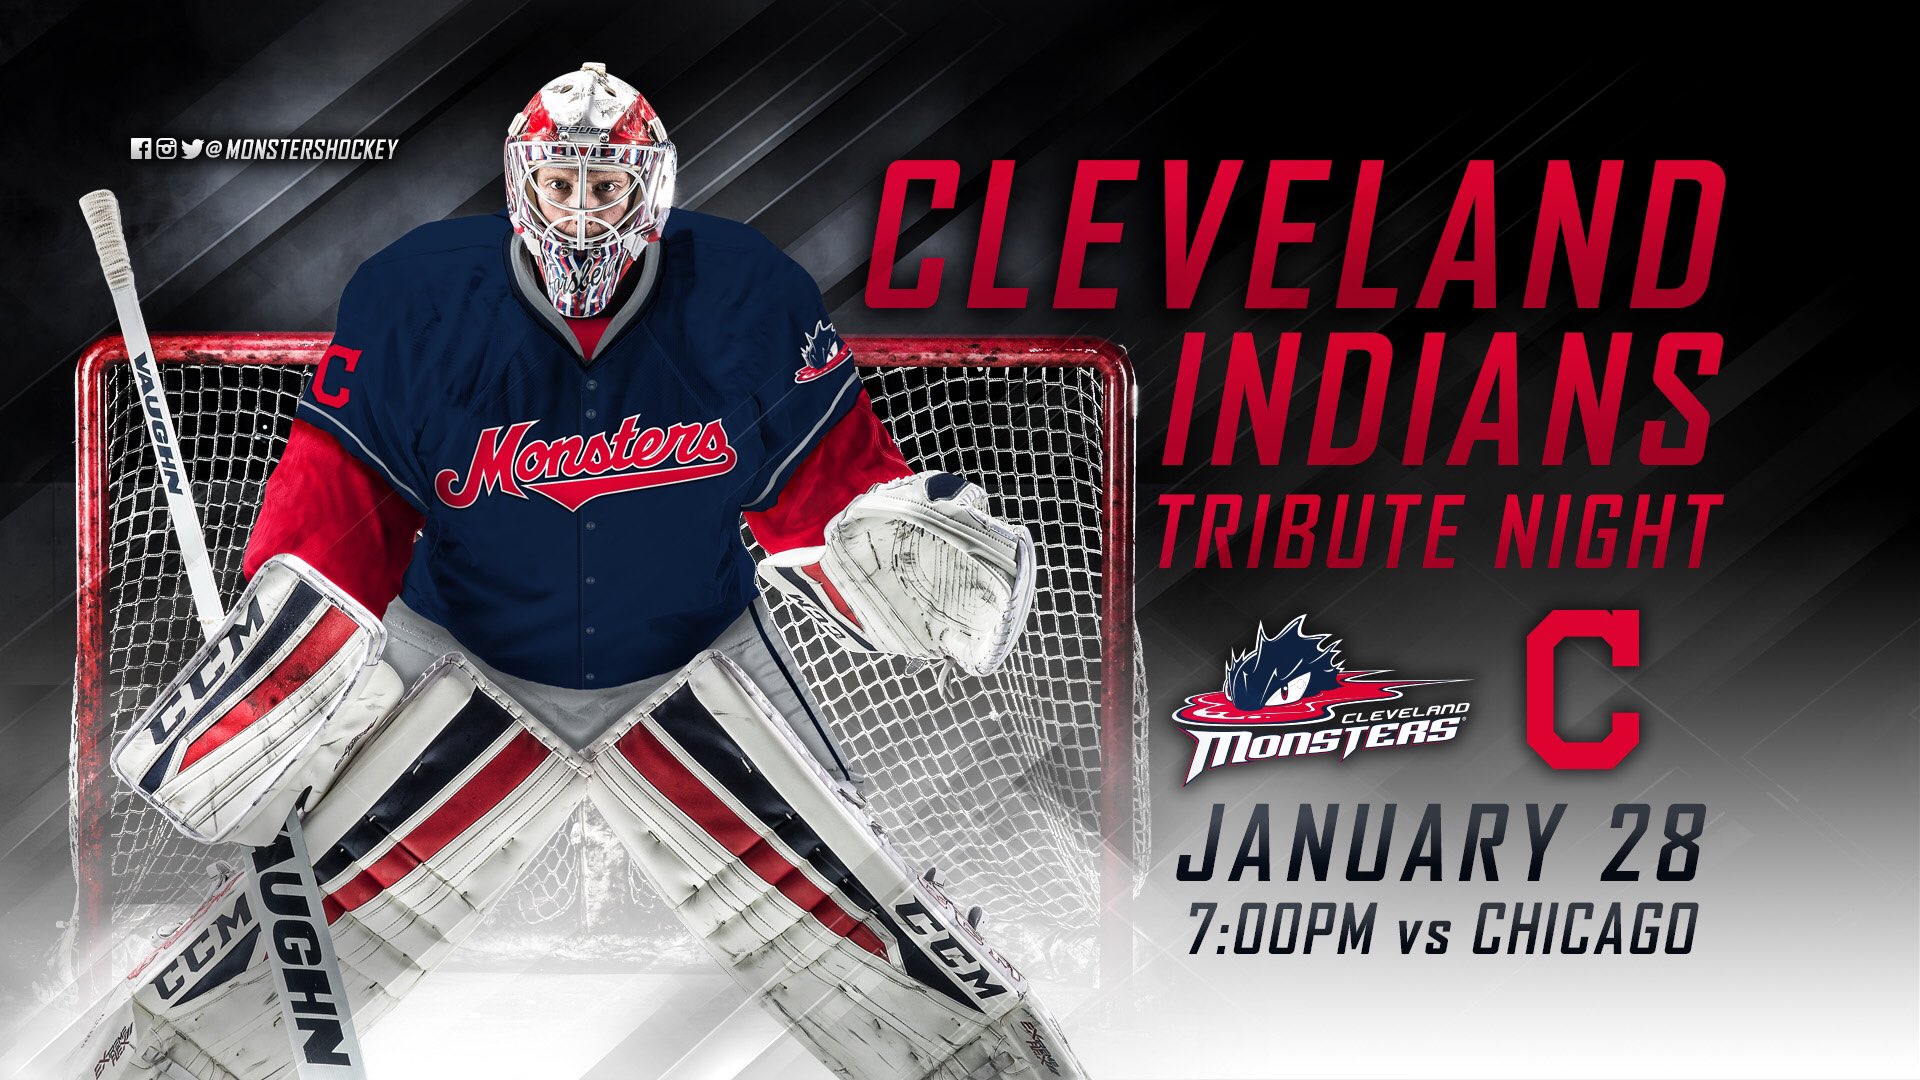 Monsters To Hold First-Ever Cleveland Indians Tribute Night On January 28th